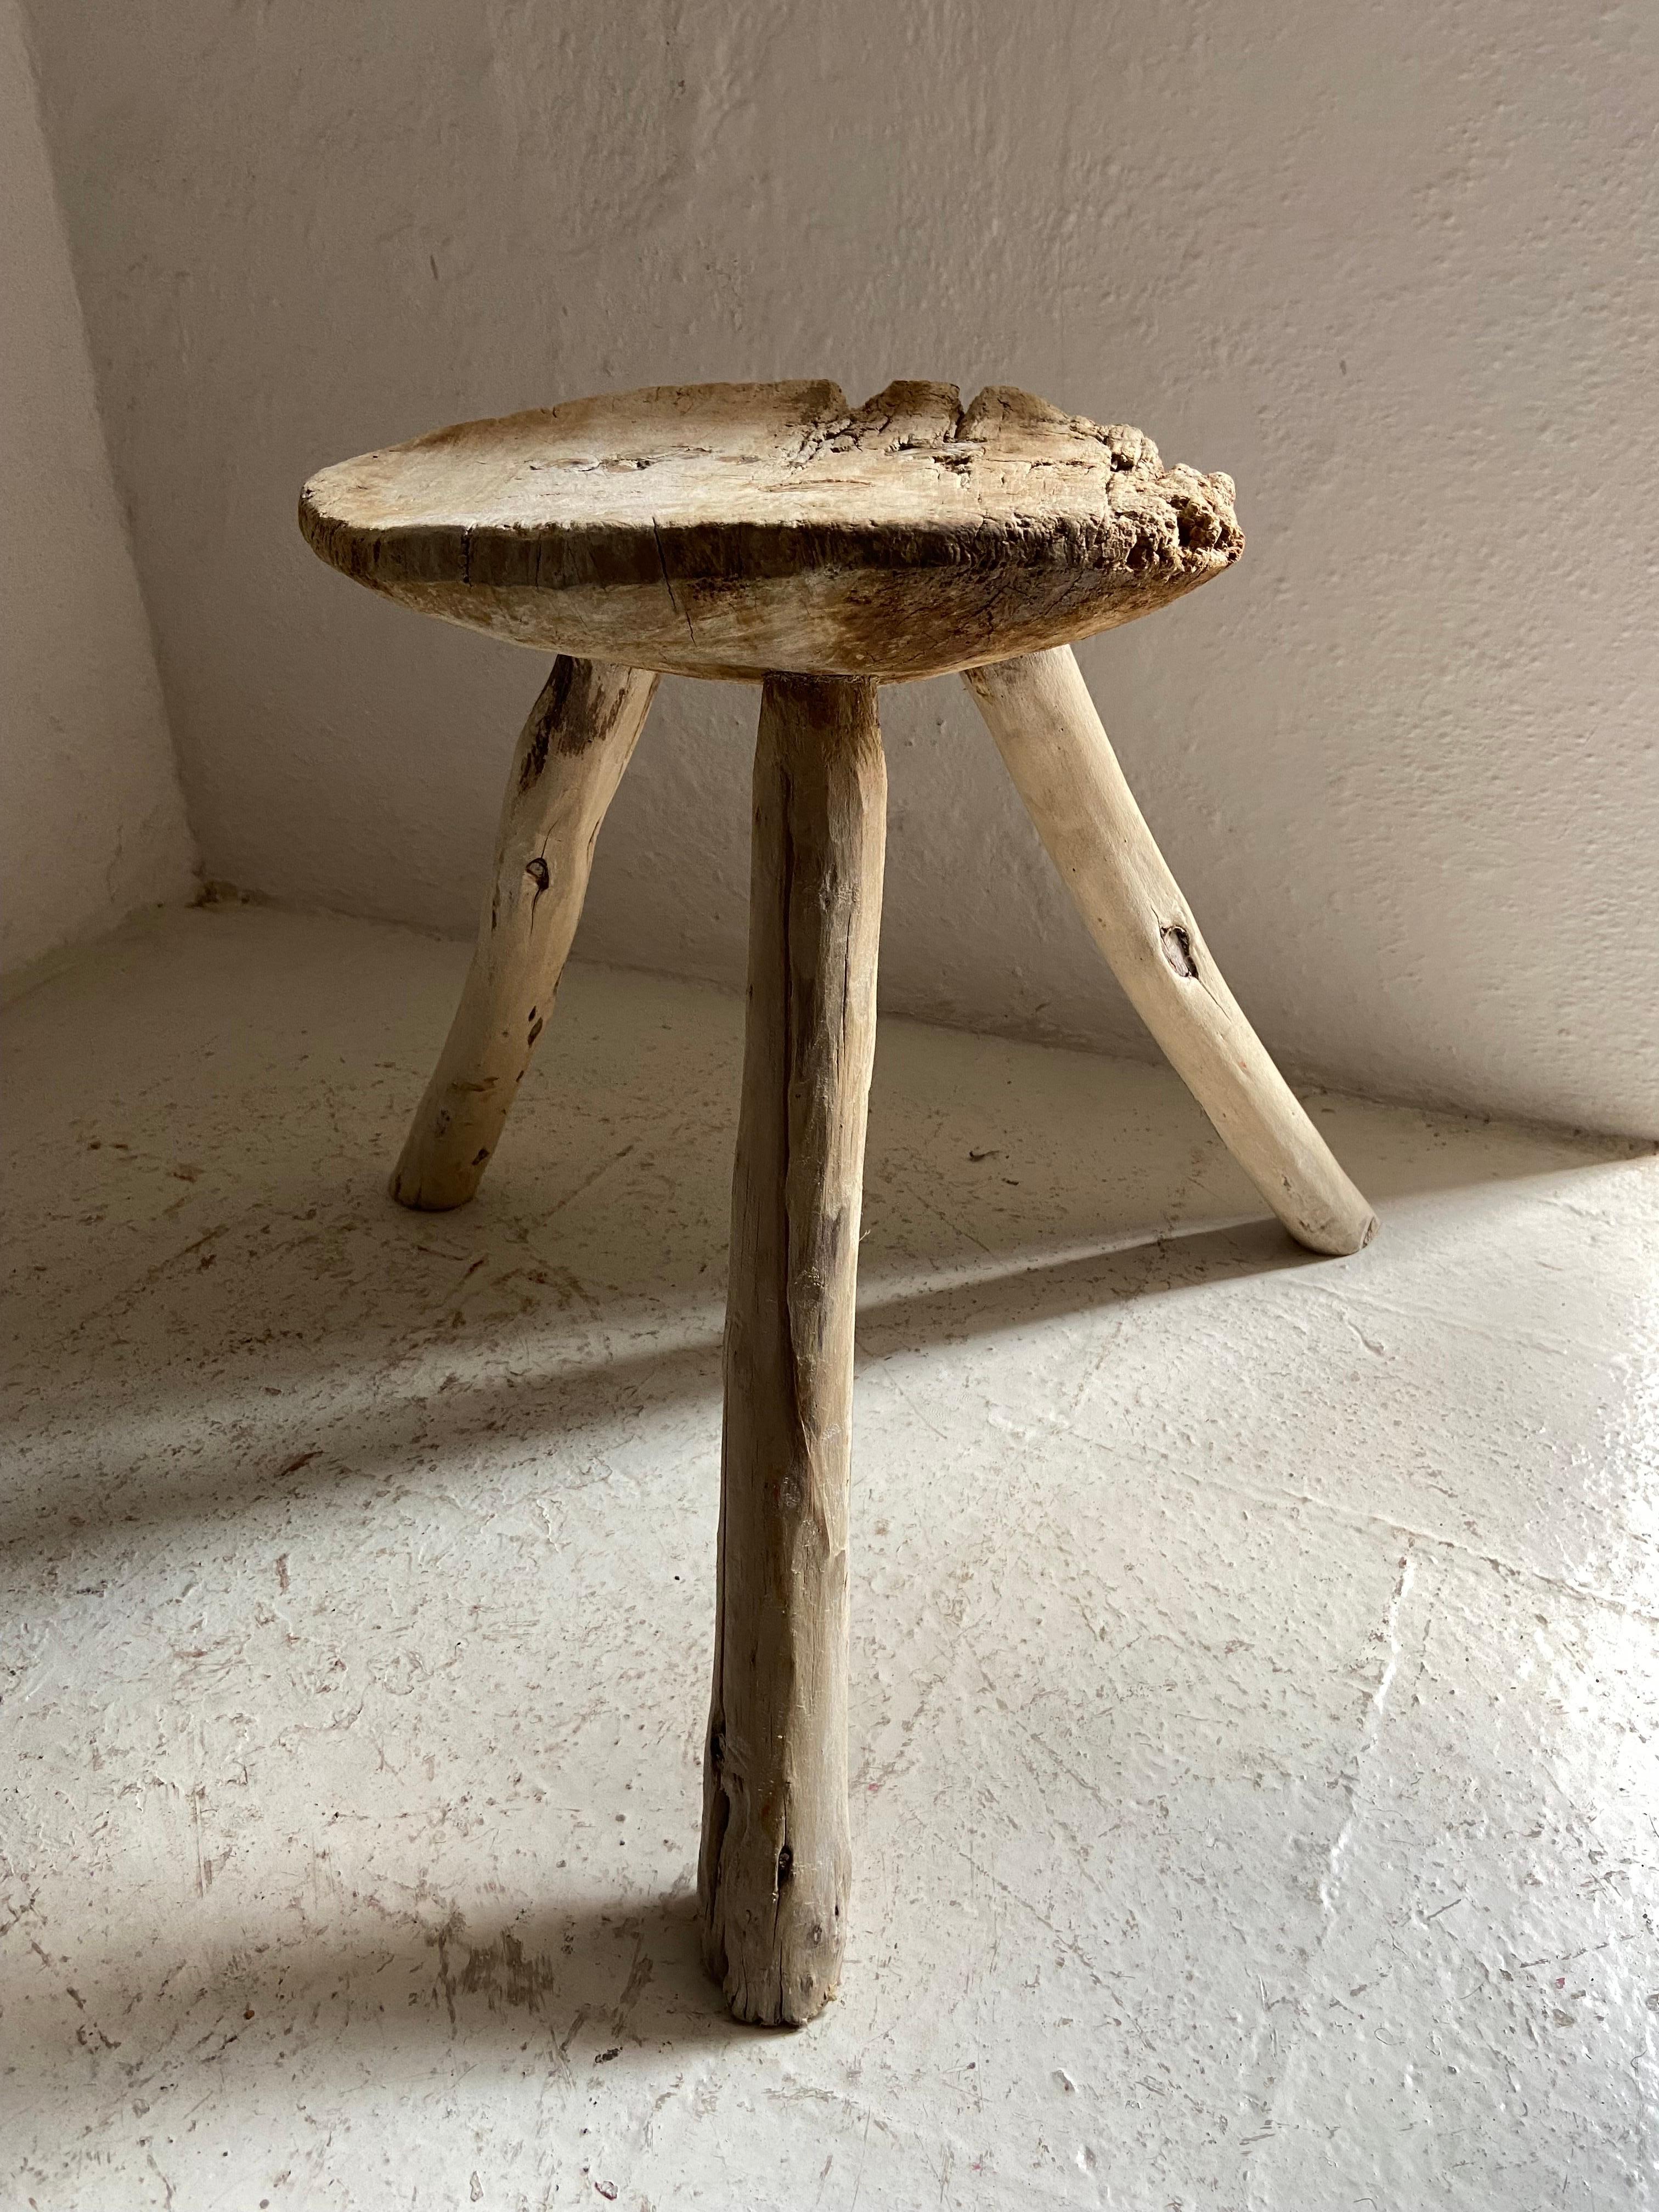 Mid-20th Century stool from San Luis Potosí, Mexico made from Sabino wood. This stool is Primitive in design and shows significant wear or distress on one side of the seat.